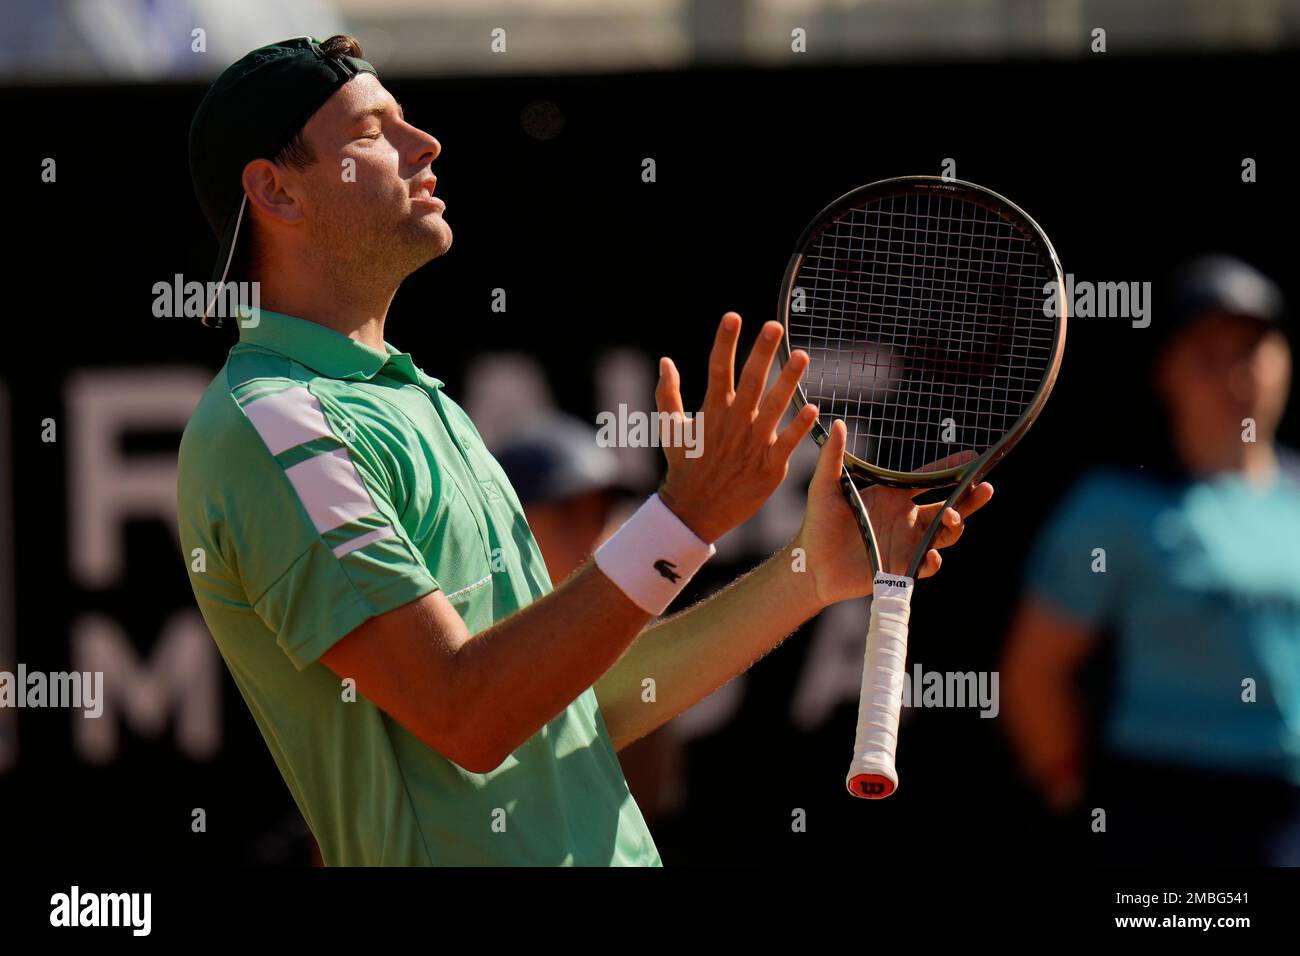 CORRECTS SLUG AND BYLINE Serbias Filip Krajinovic reacts during his match against Italys Jannik Sinner at the Italian Open tennis tournament, in Rome, Thursday, May 12, 2022